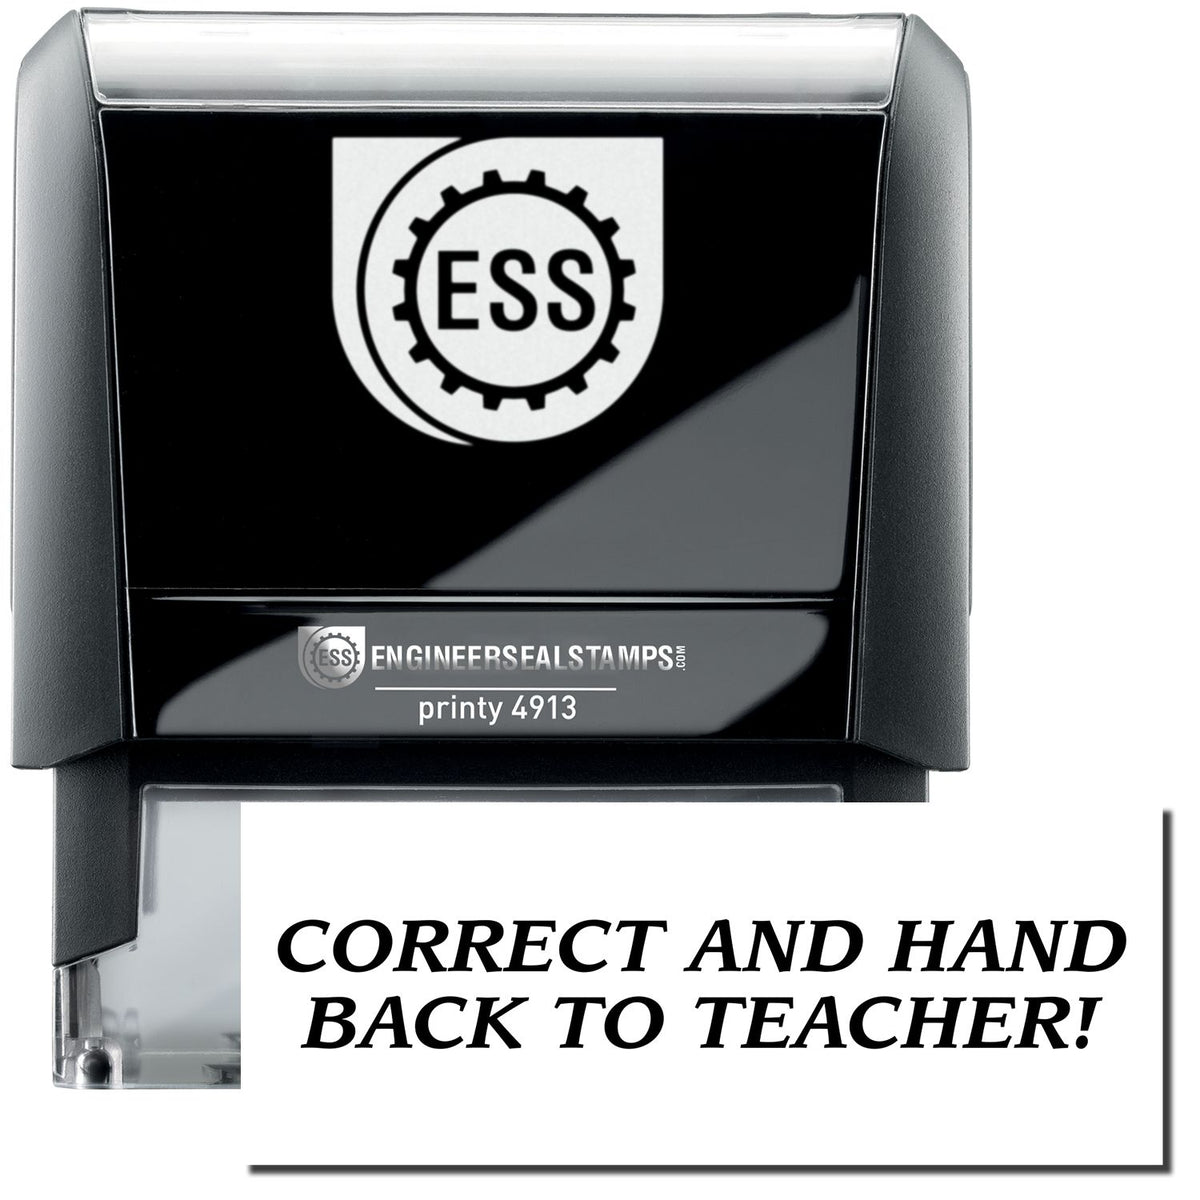 A self-inking stamp with a stamped image showing how the text &quot;CORRECT AND HAND BACK TO TEACHER!&quot; in a large font is displayed by it after stamping.